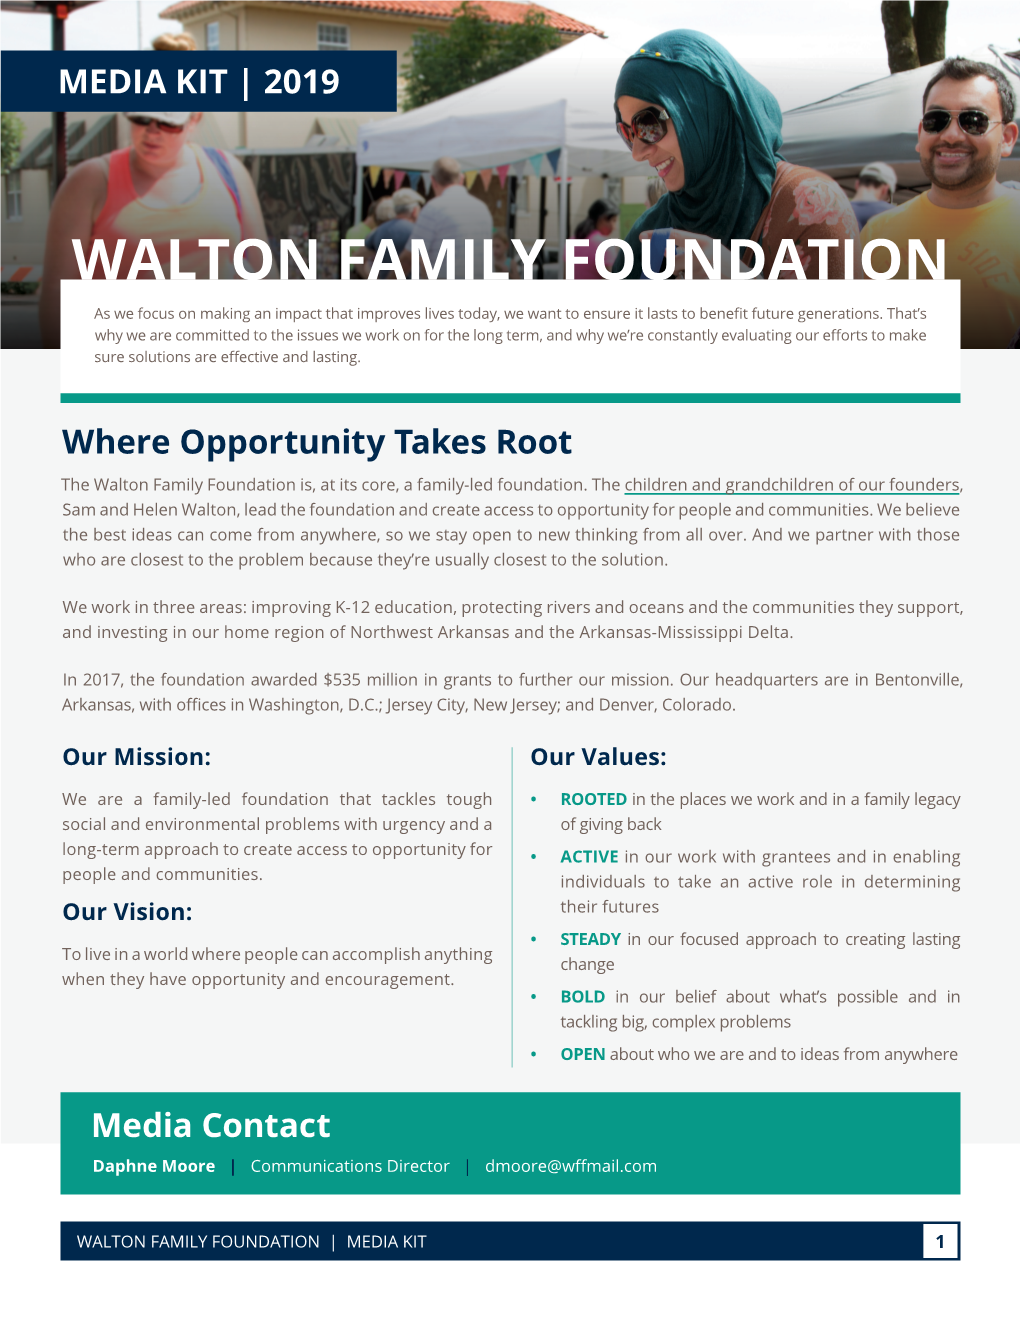 WALTON FAMILY FOUNDATION As We Focus on Making an Impact That Improves Lives Today, We Want to Ensure It Lasts to Benefit Future Generations